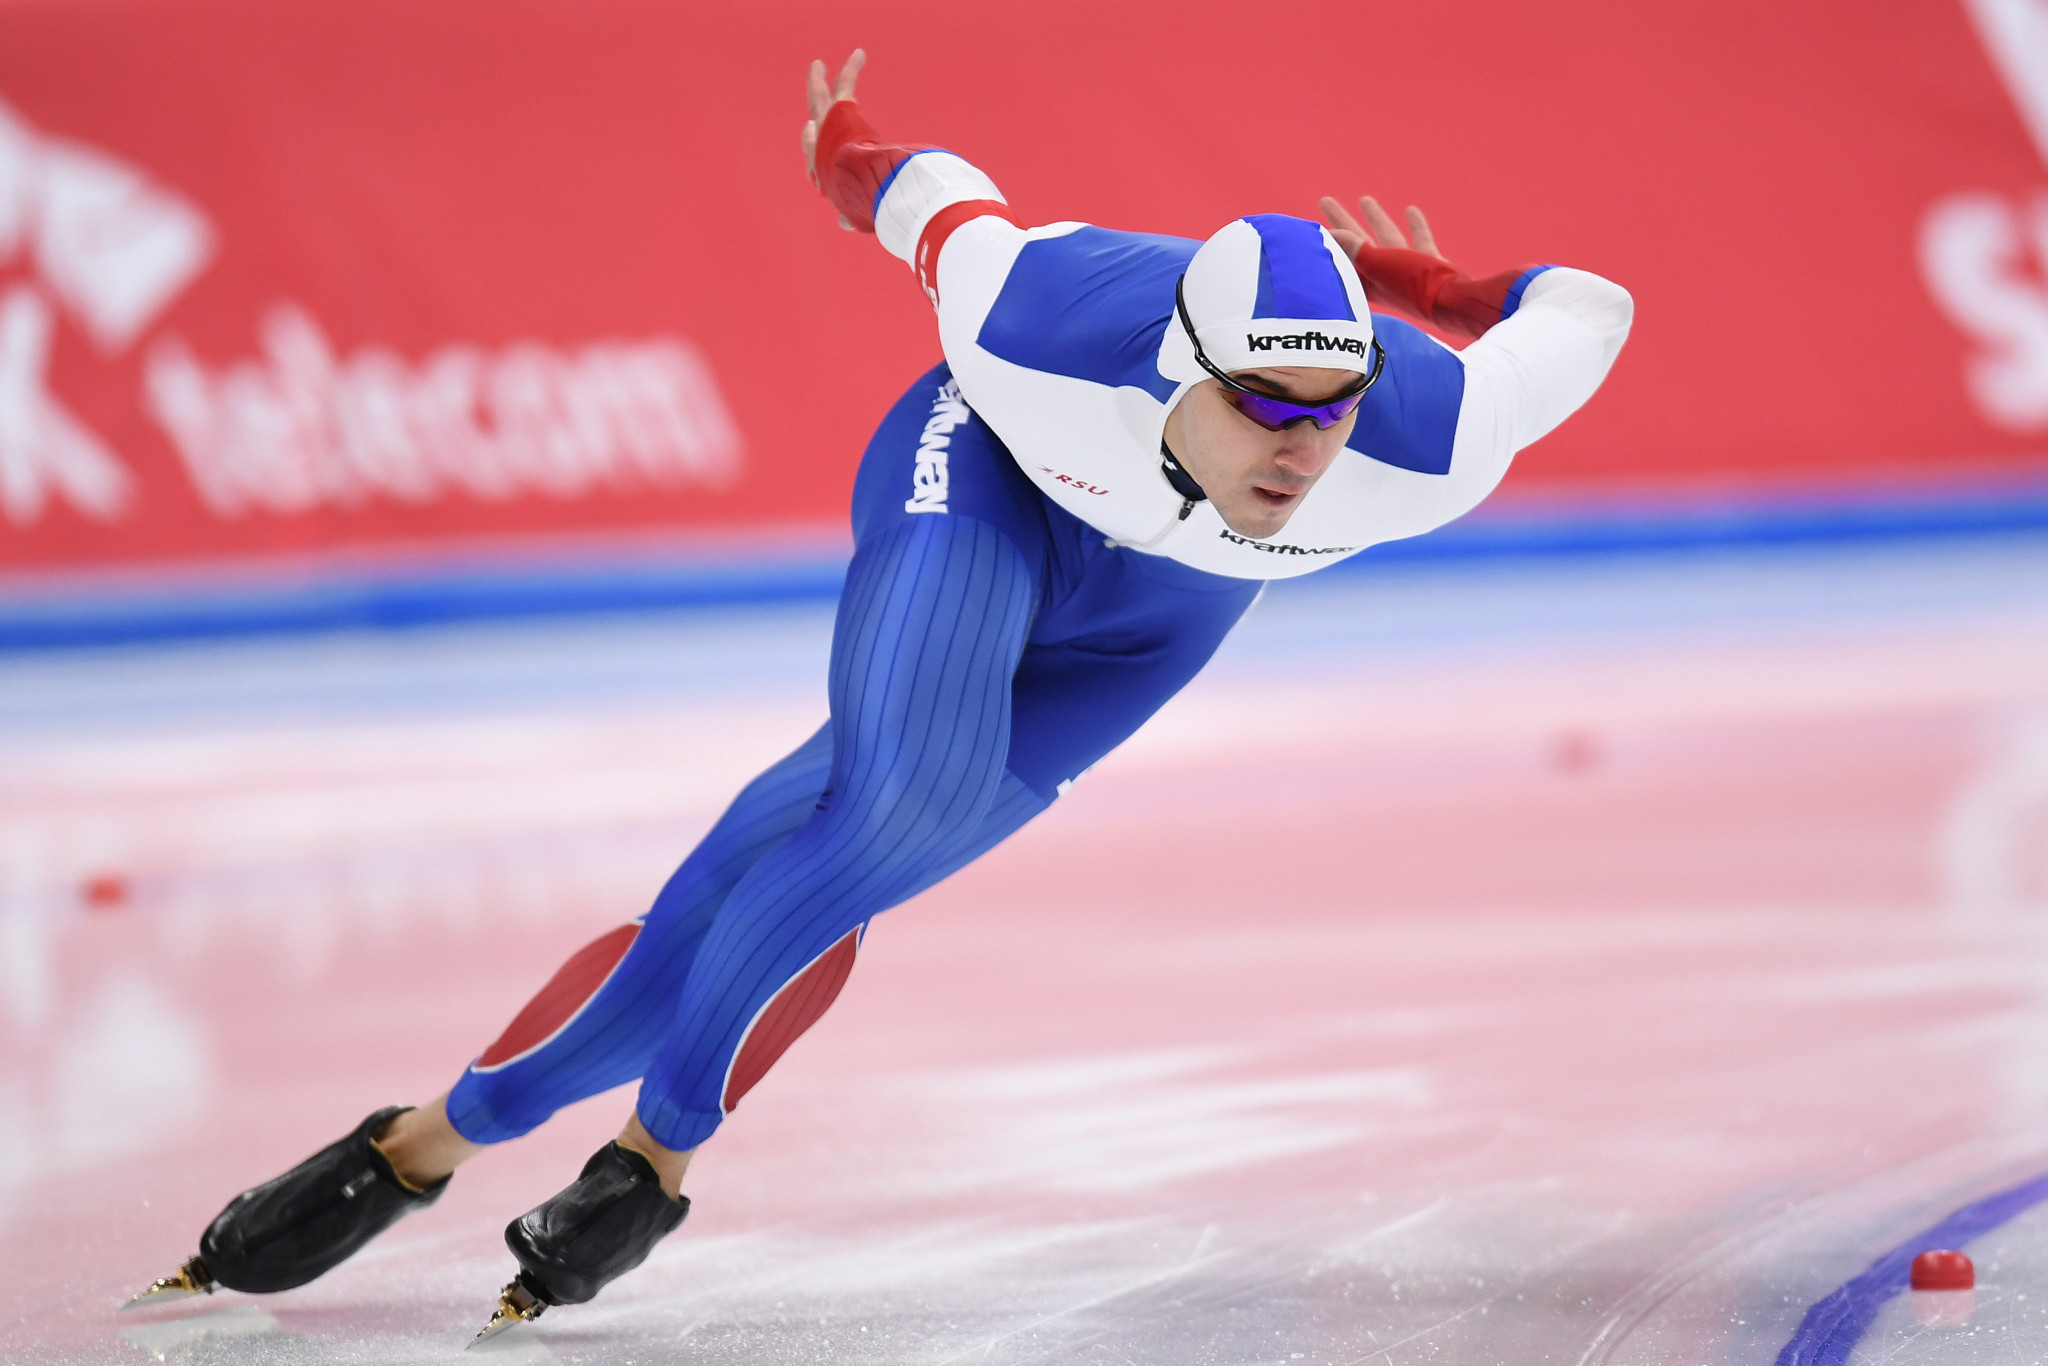 Ruslan Murashov triumphed in the men's 500m event in Calgary ©Getty Images